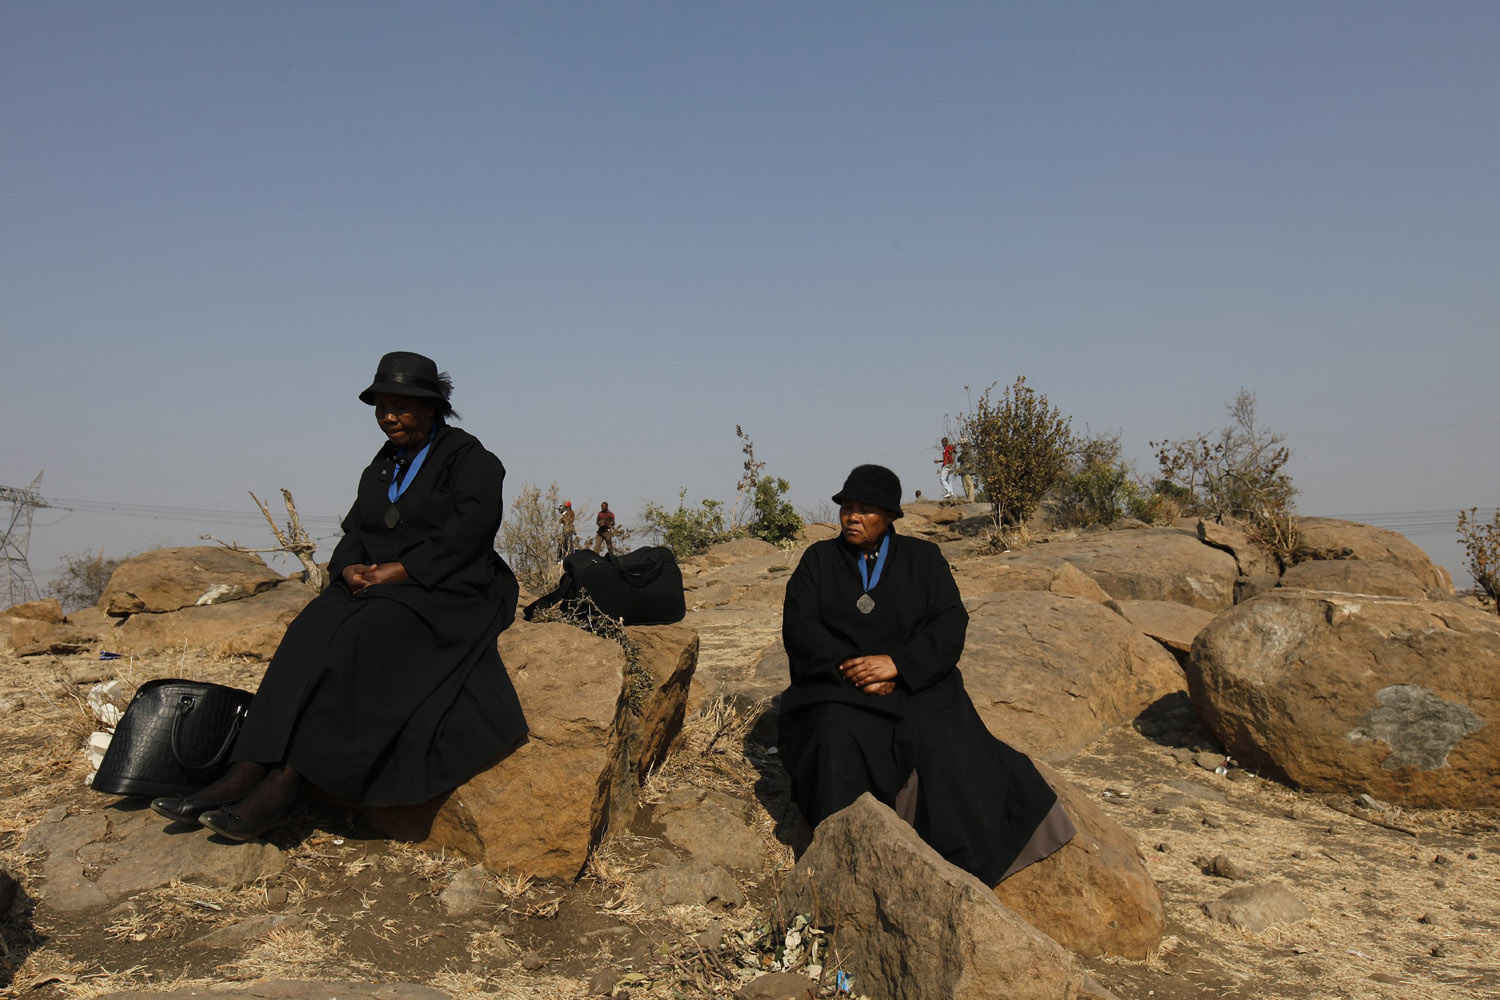 Aug. 23, 2012. Members from a local church mourn near the site where miners were killed during clashes at Lonmin's Marikana platinum mine, before a memorial service in Rustenburg, 100 km (62 miles) northwest of Johannesburg,